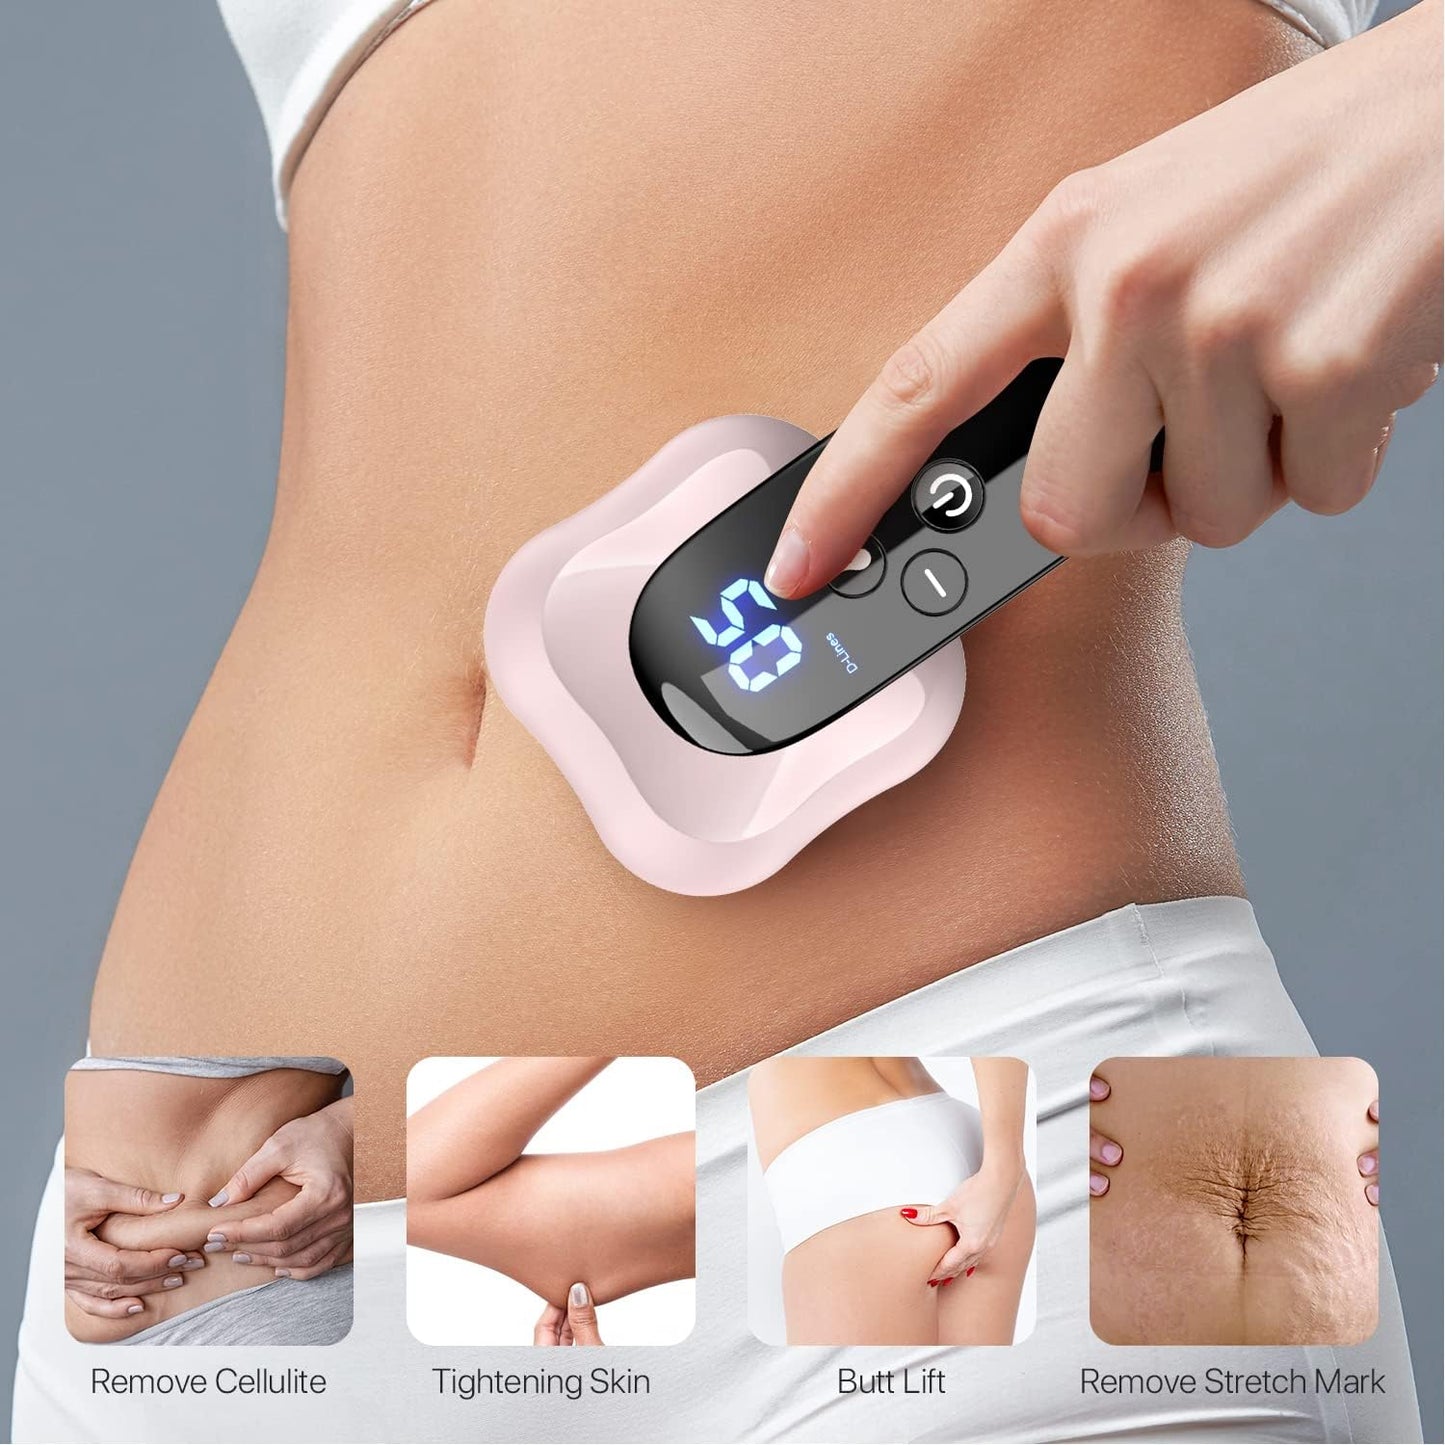 Body Sculpting Machine, Cellulite Massager Upgraded 2.0, Handheld Cellulite Fat Machine for Belly Arms Legs Waist Butt, 4 Massage Heads Larger Contact Surface with Body